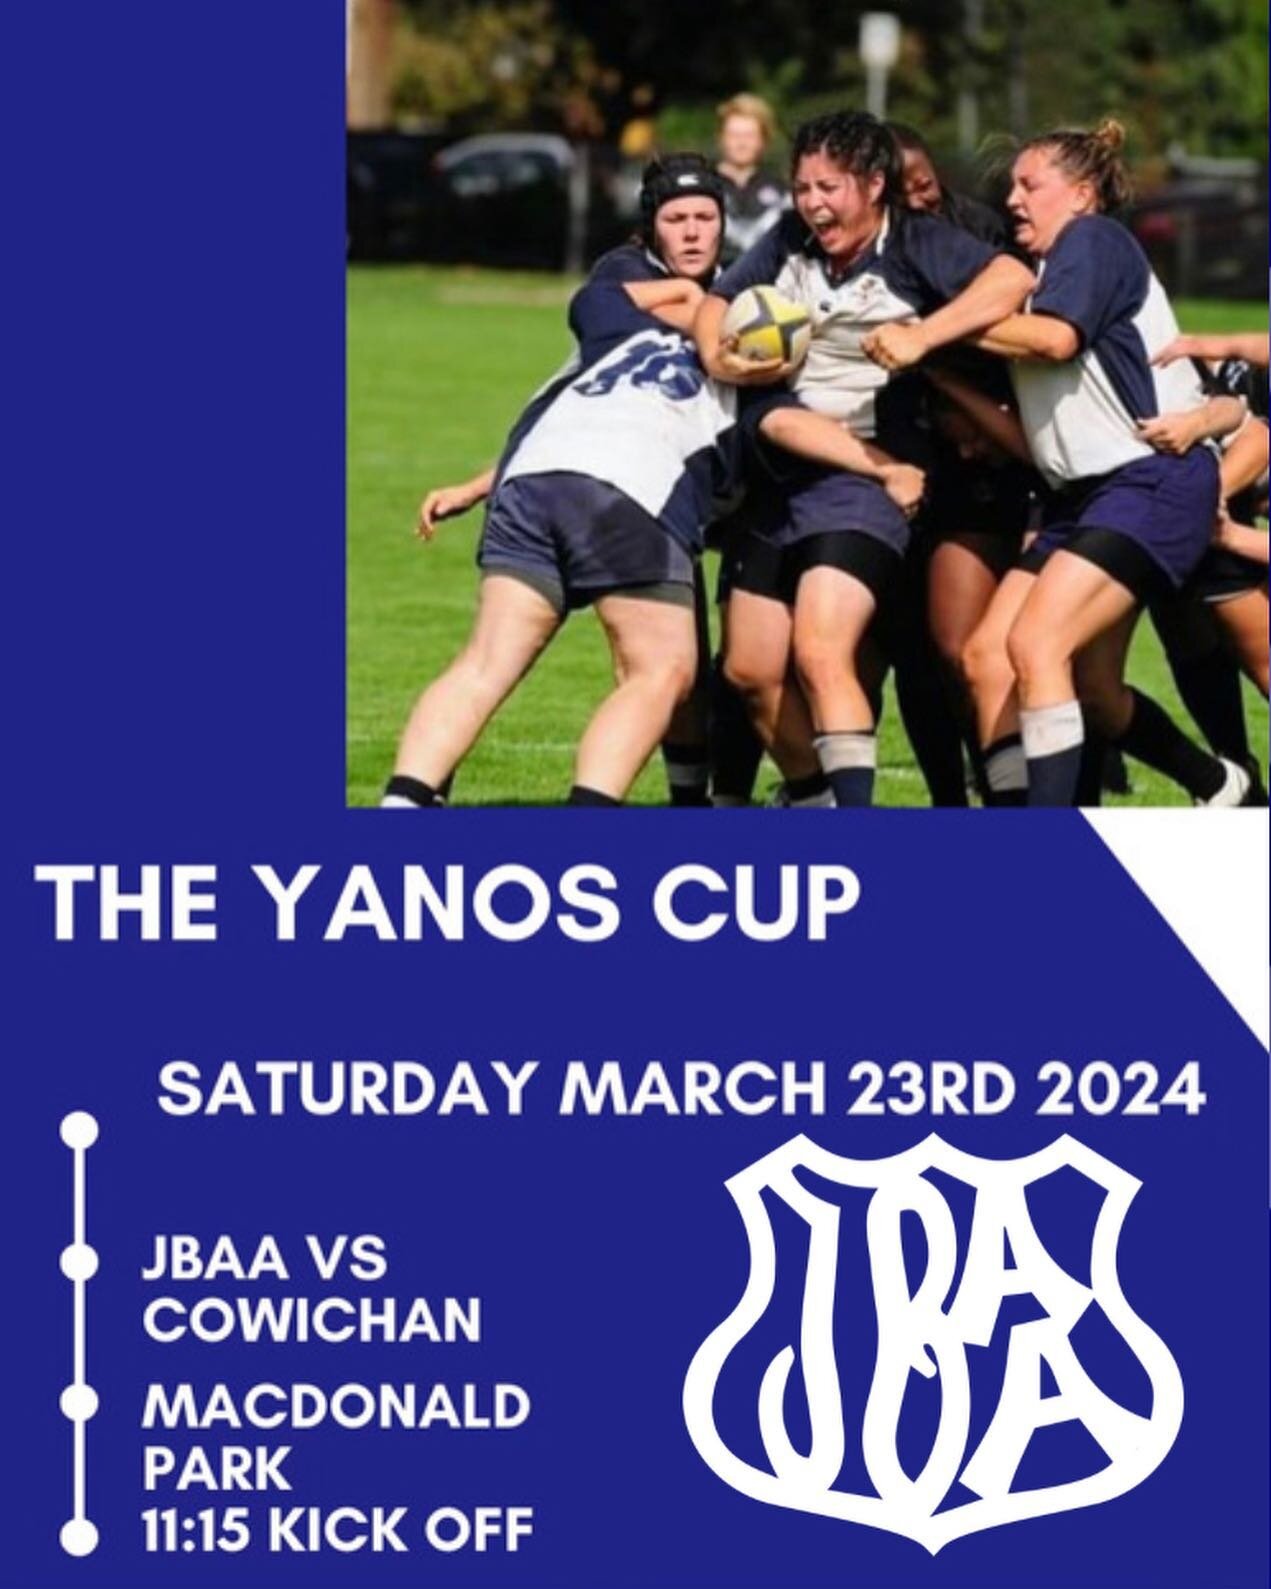 This Saturday our women will battle  @cowichanrugbyclub for the Yanos cup in honour of Nikki Yano. 

Nikki was a beloved team and club mate who started her rugby career in Cowichan before playing for the Bays. Brave and courageous until the end. It&r